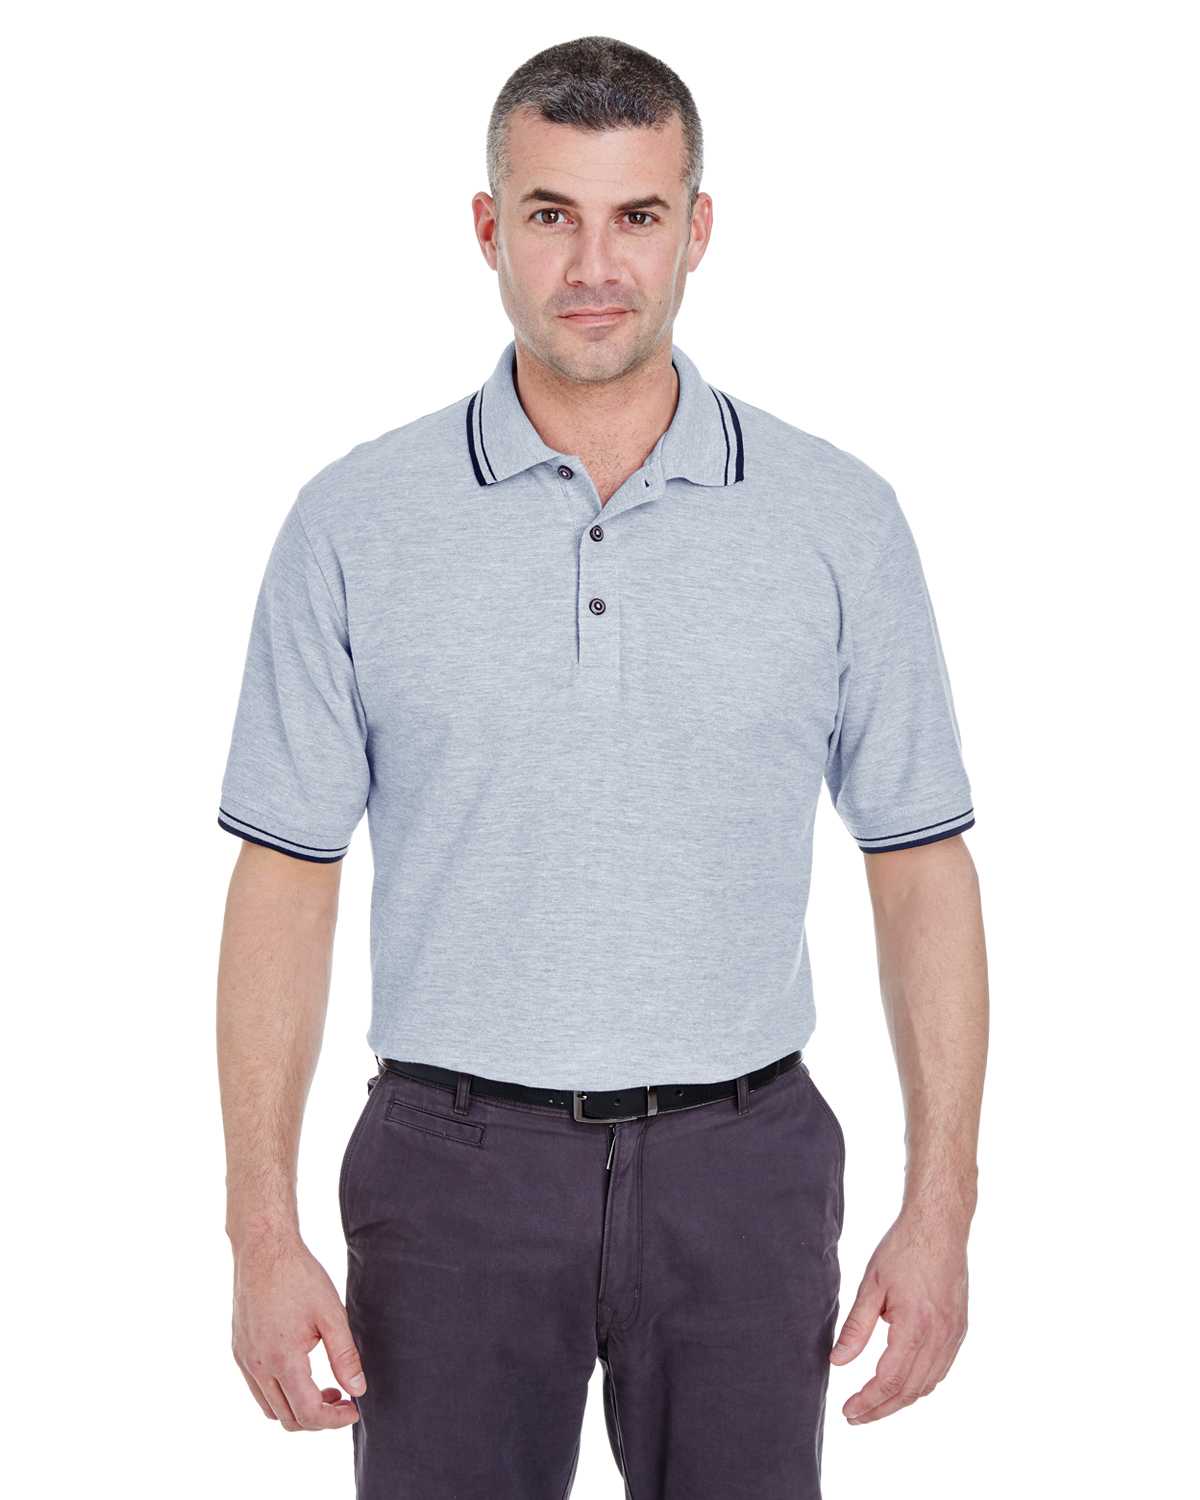 UltraClub 8545 Men's Short-Sleeve Whisper Pique Polo with Tipped Collar ...